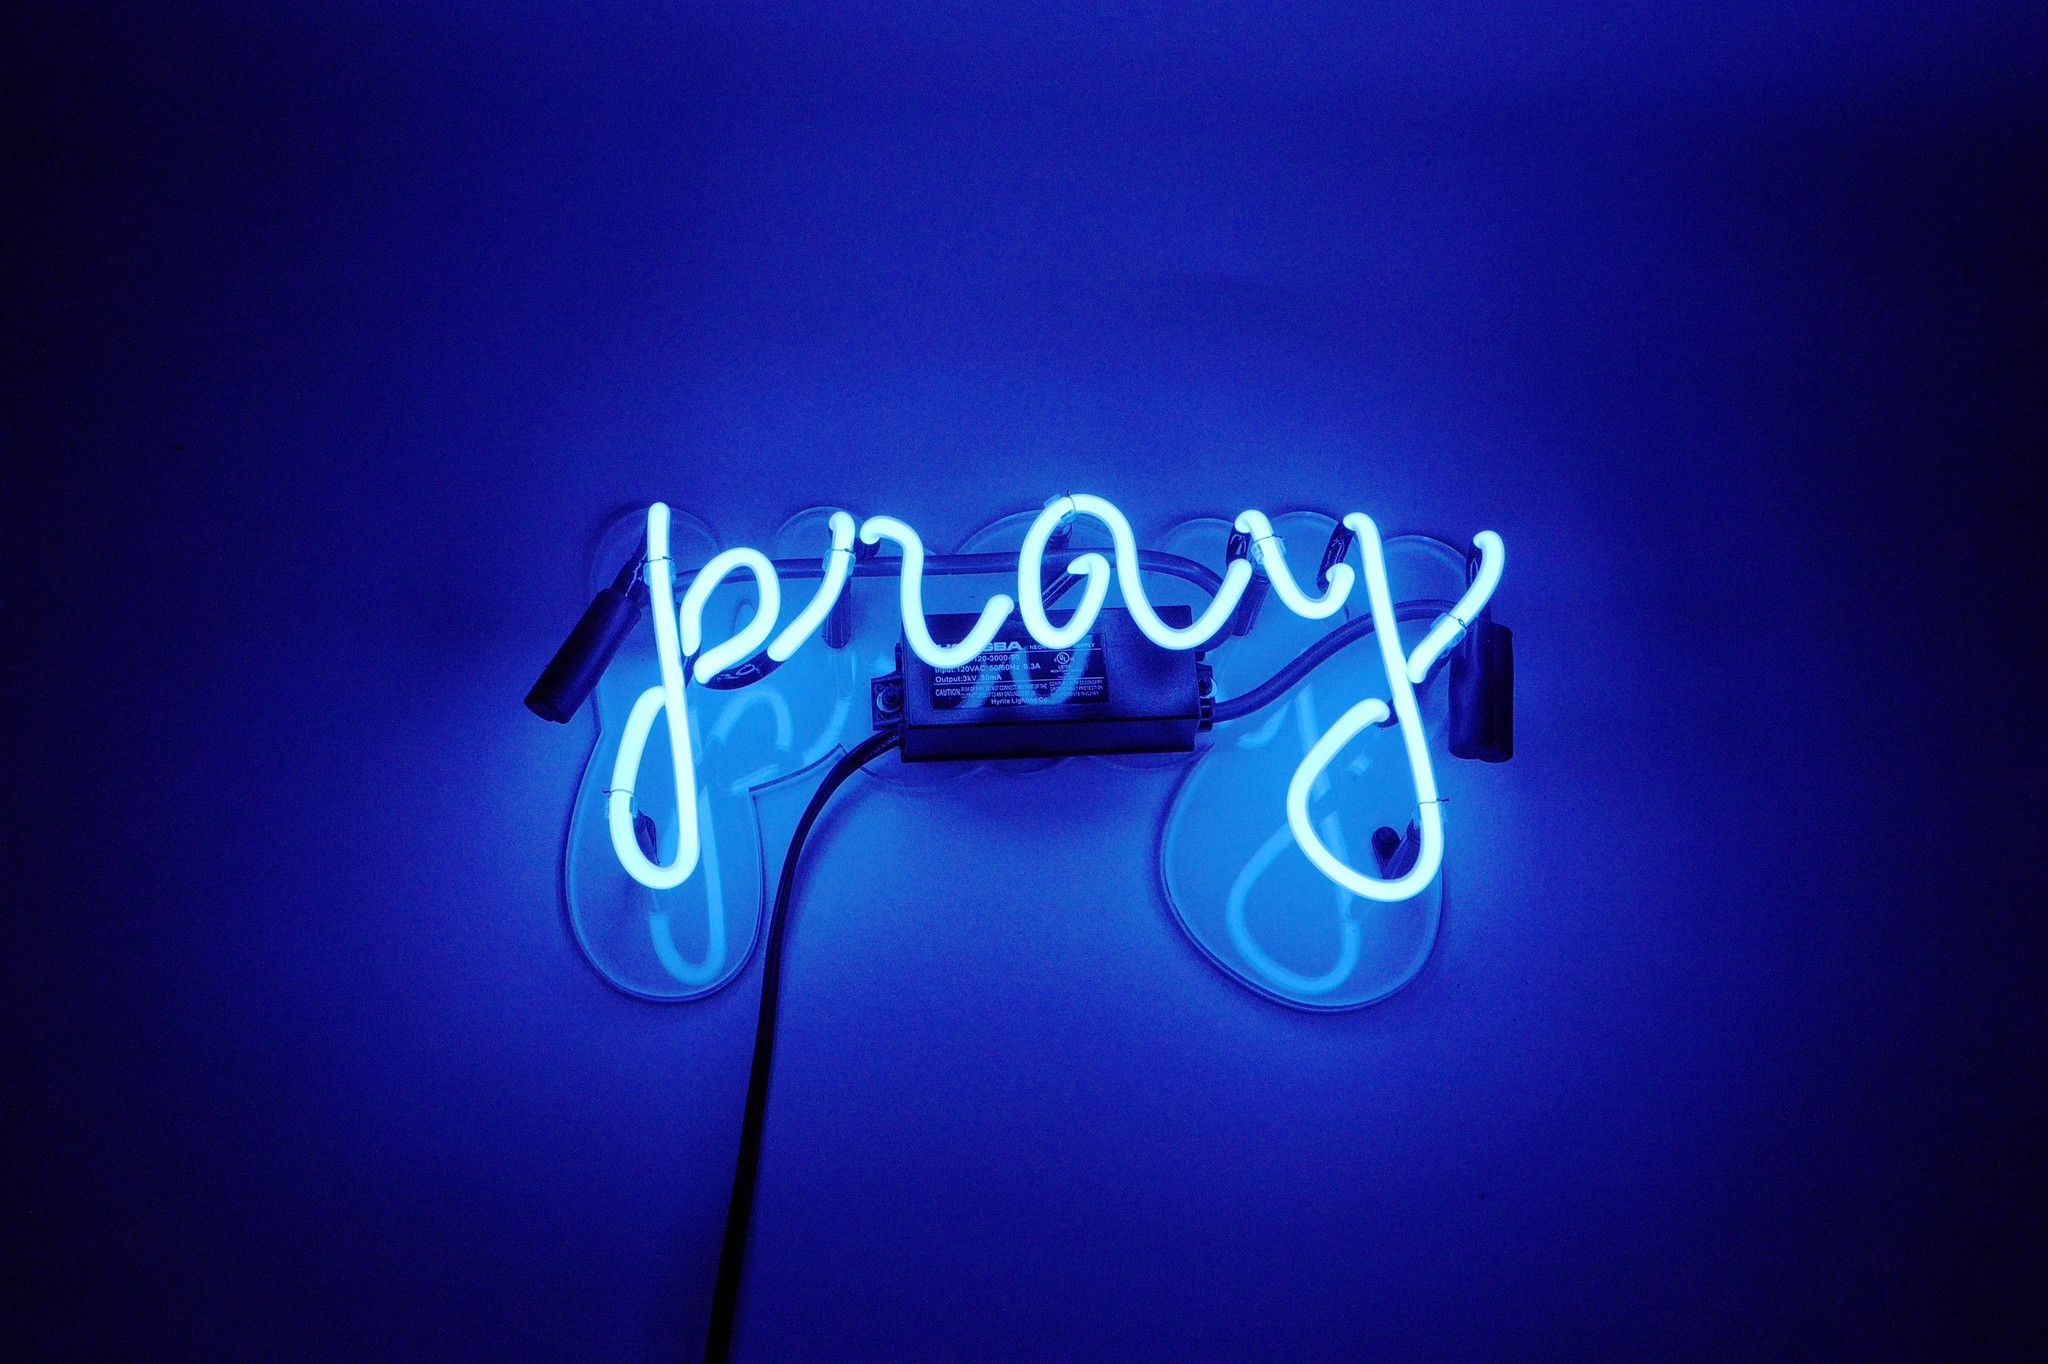 Pray Neon Sign. Neon signs, Blue aesthetic, Neon aesthetic